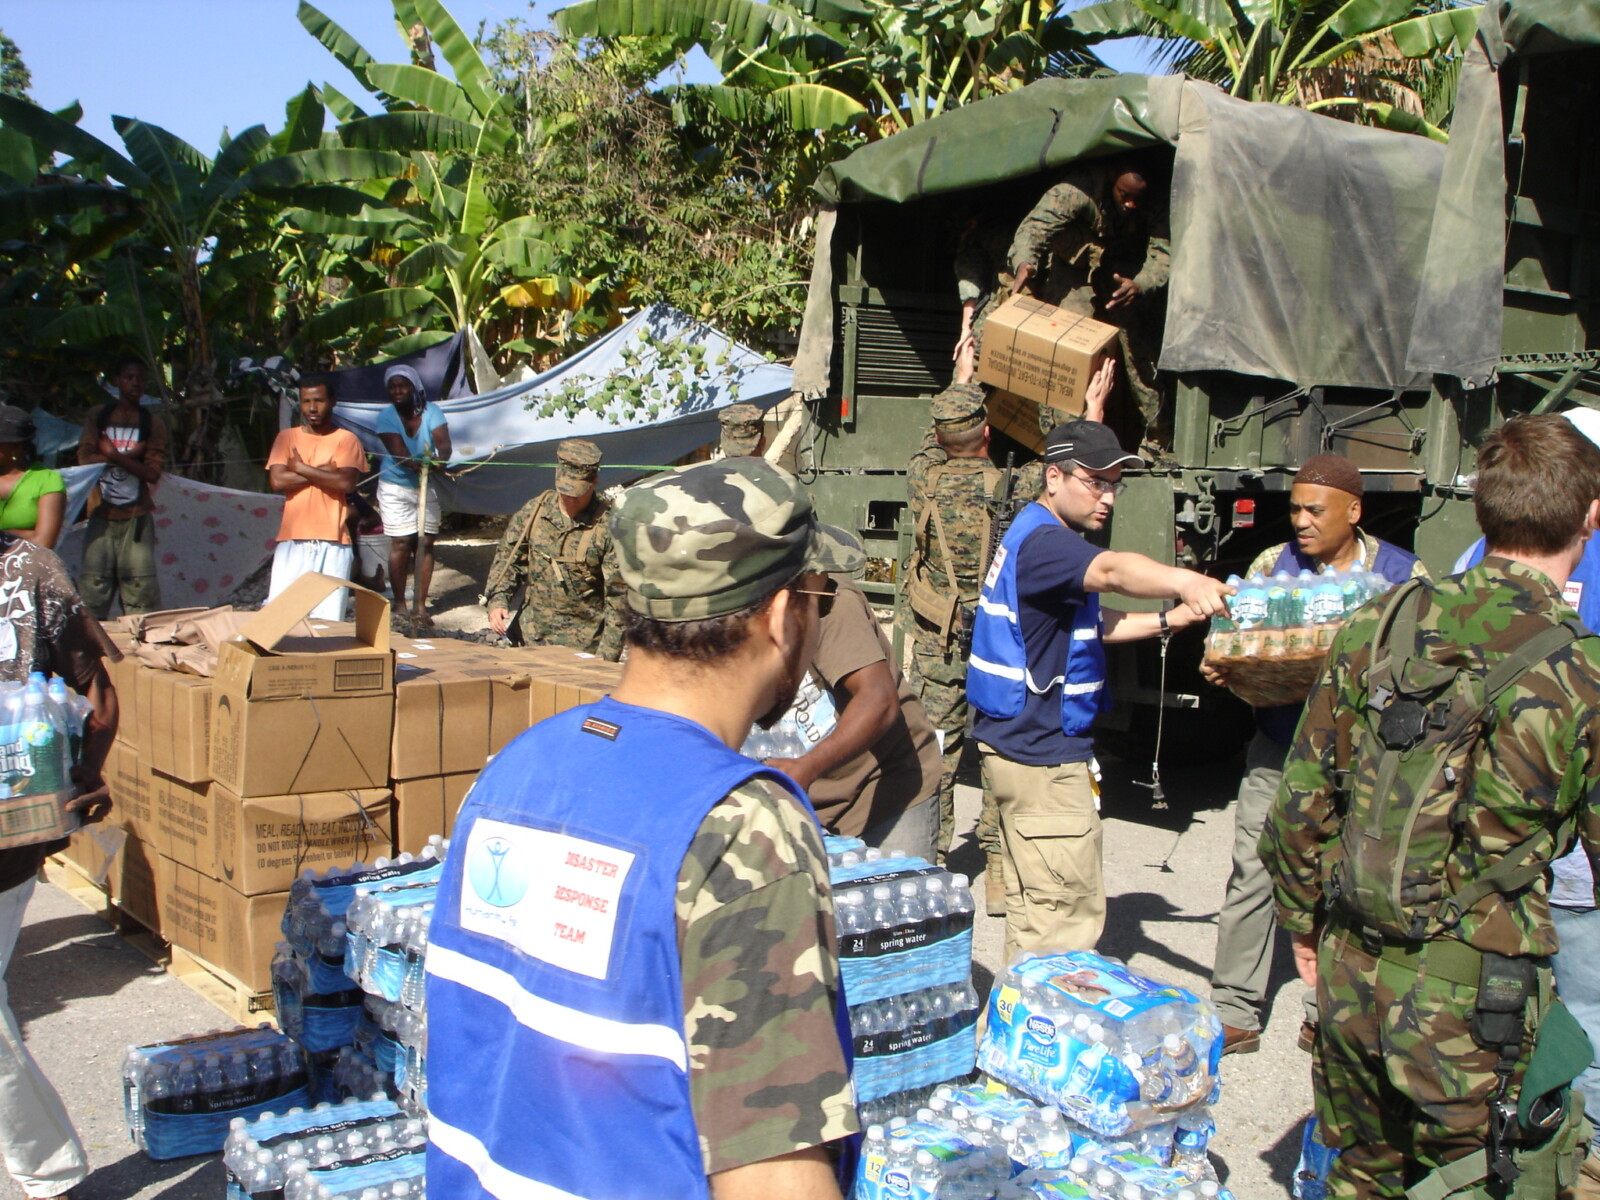 Men in fatigues and blue humanity first vests organize boxes and pallets of bottled water unloaded from a truck